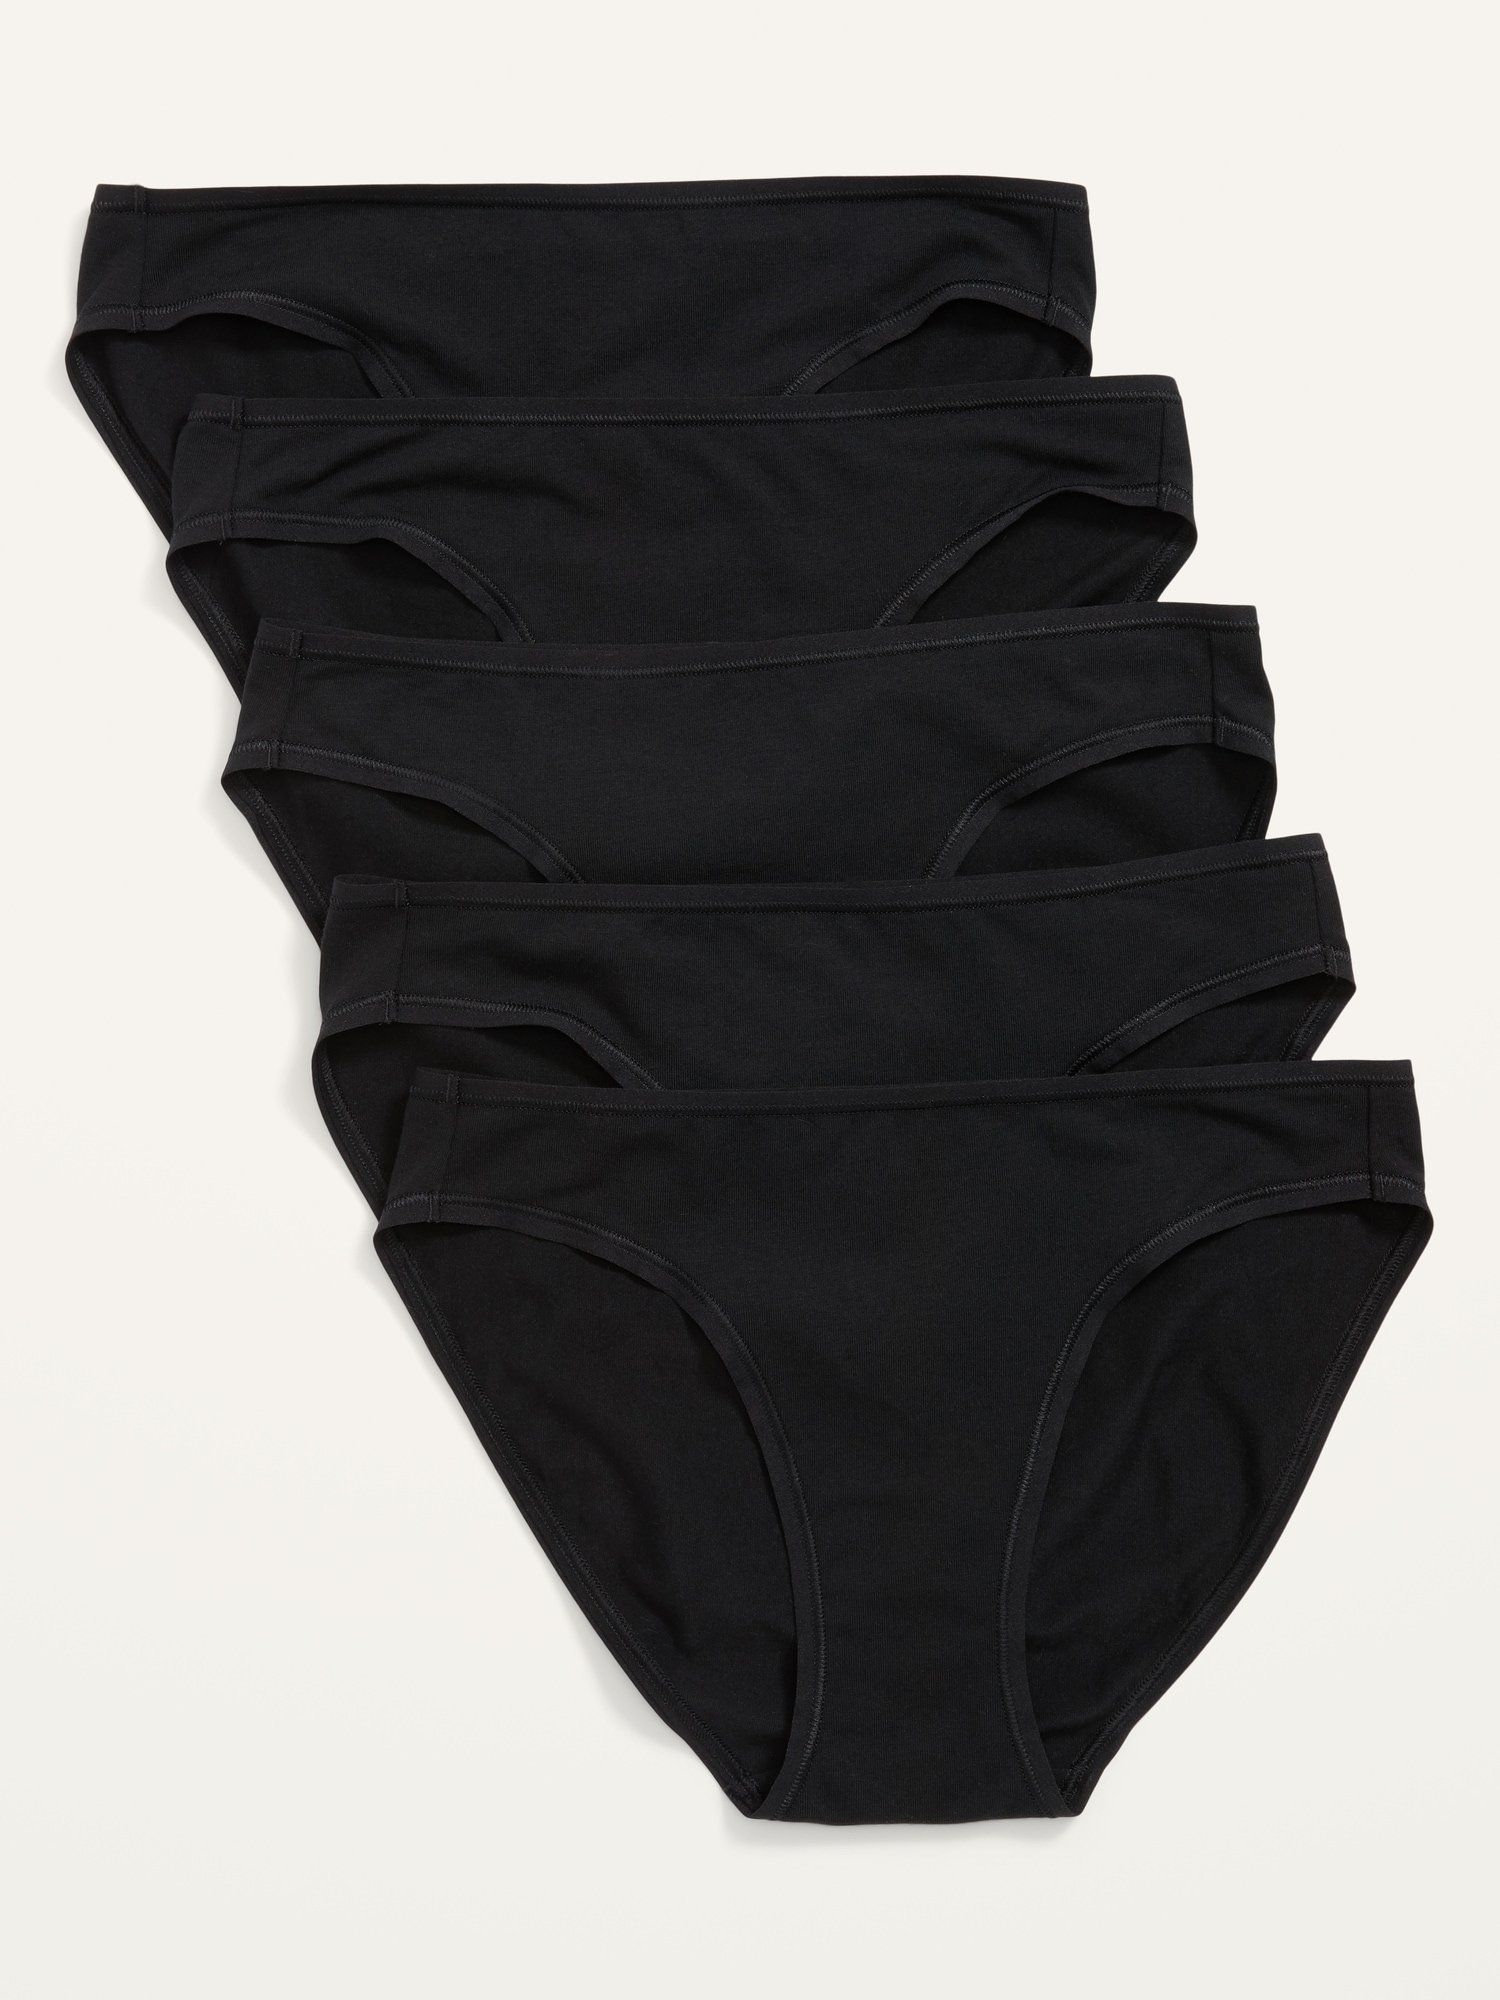 24 Pieces Yacht And Smith 95% Cotton Women's Underwear In Black, Size Small  - Womens Panties & Underwear